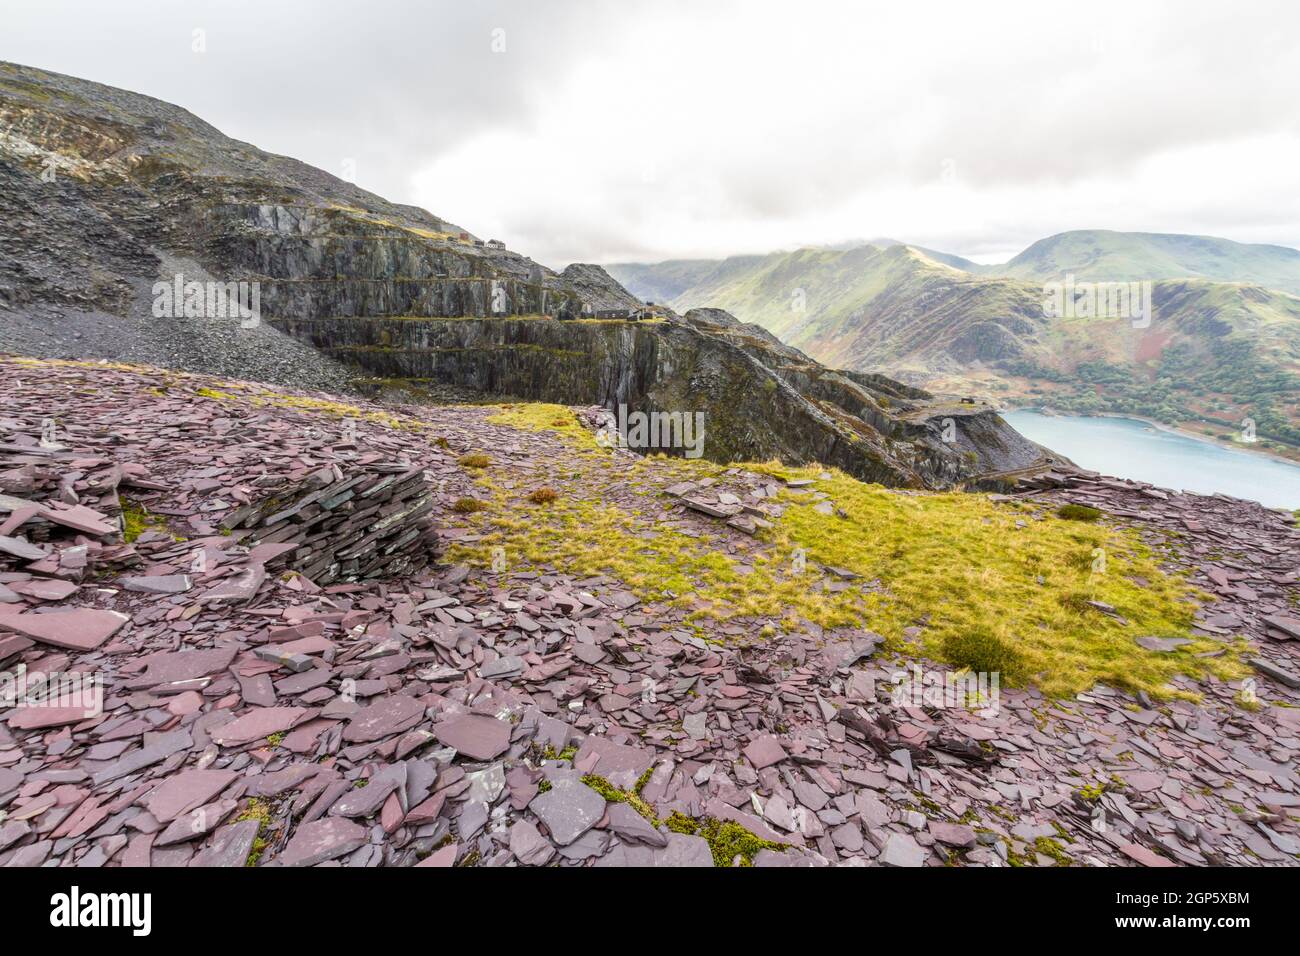 Dinorwic or Dinorwig Slate quarry, Lake Llyn Peris and Snowdonia Mountains in background Unesco World Heritage area. Stock Photo